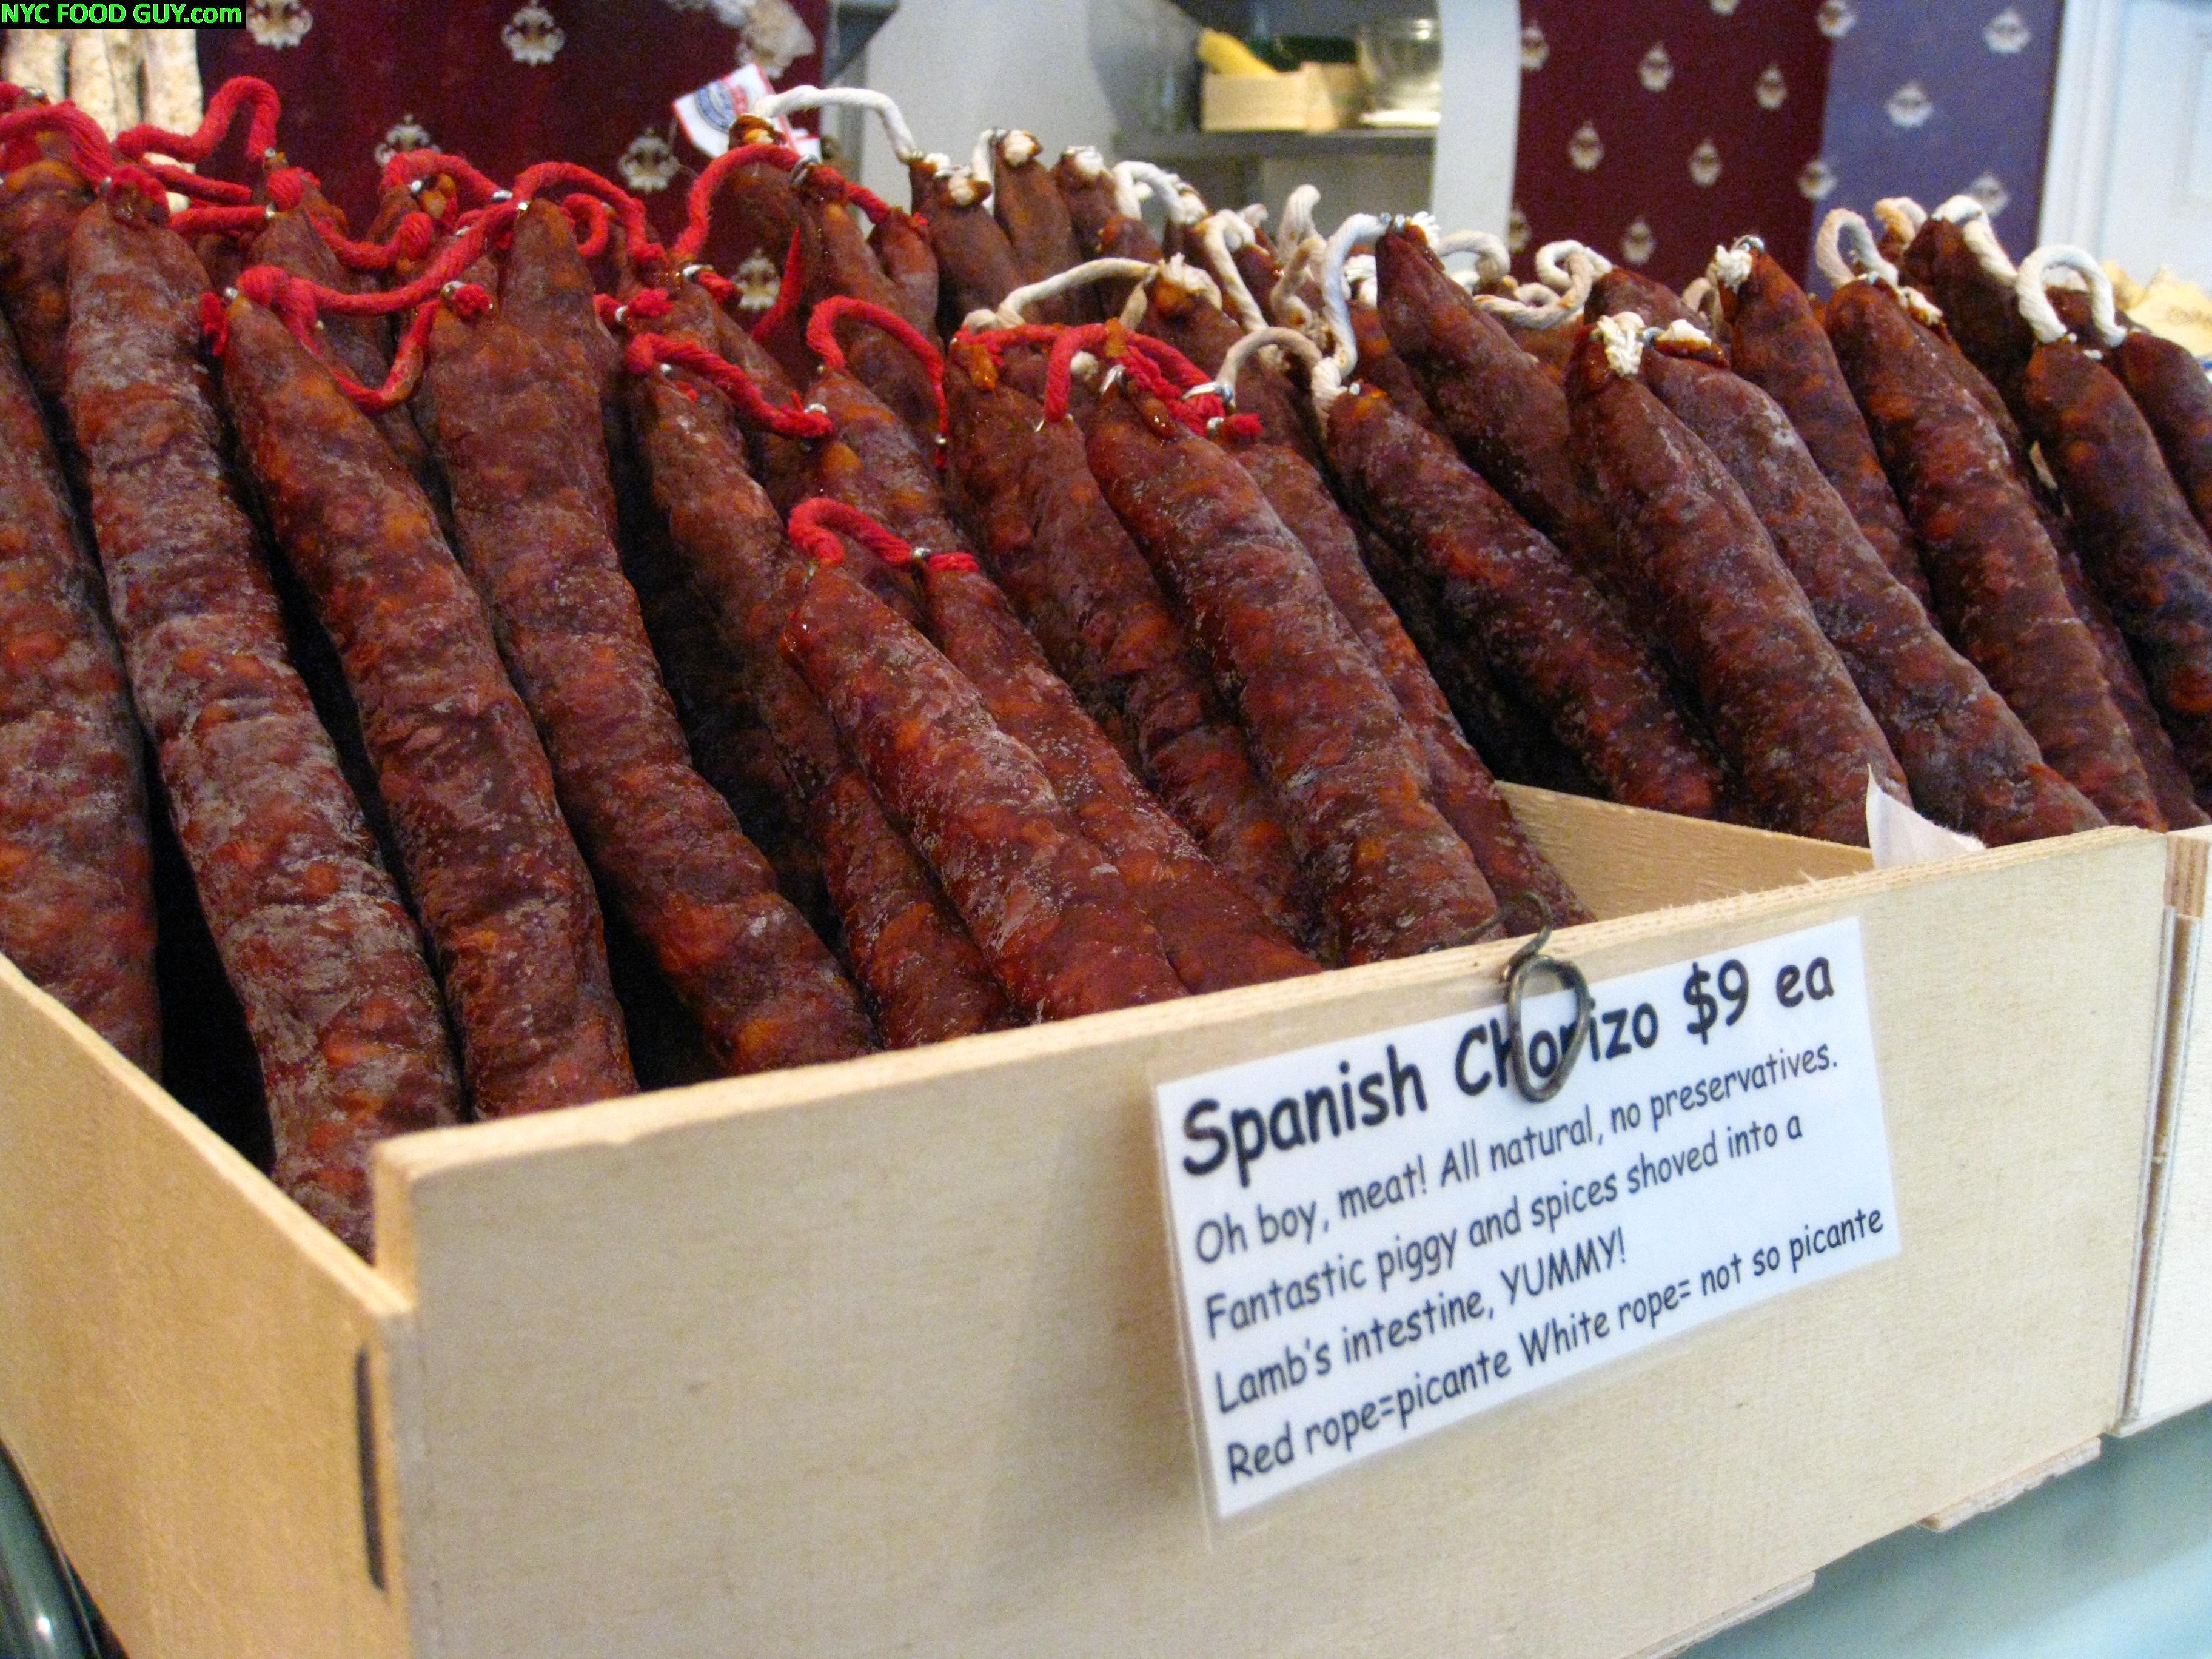 Spicy & Mild Chorizo at Bedford Cheese Shop